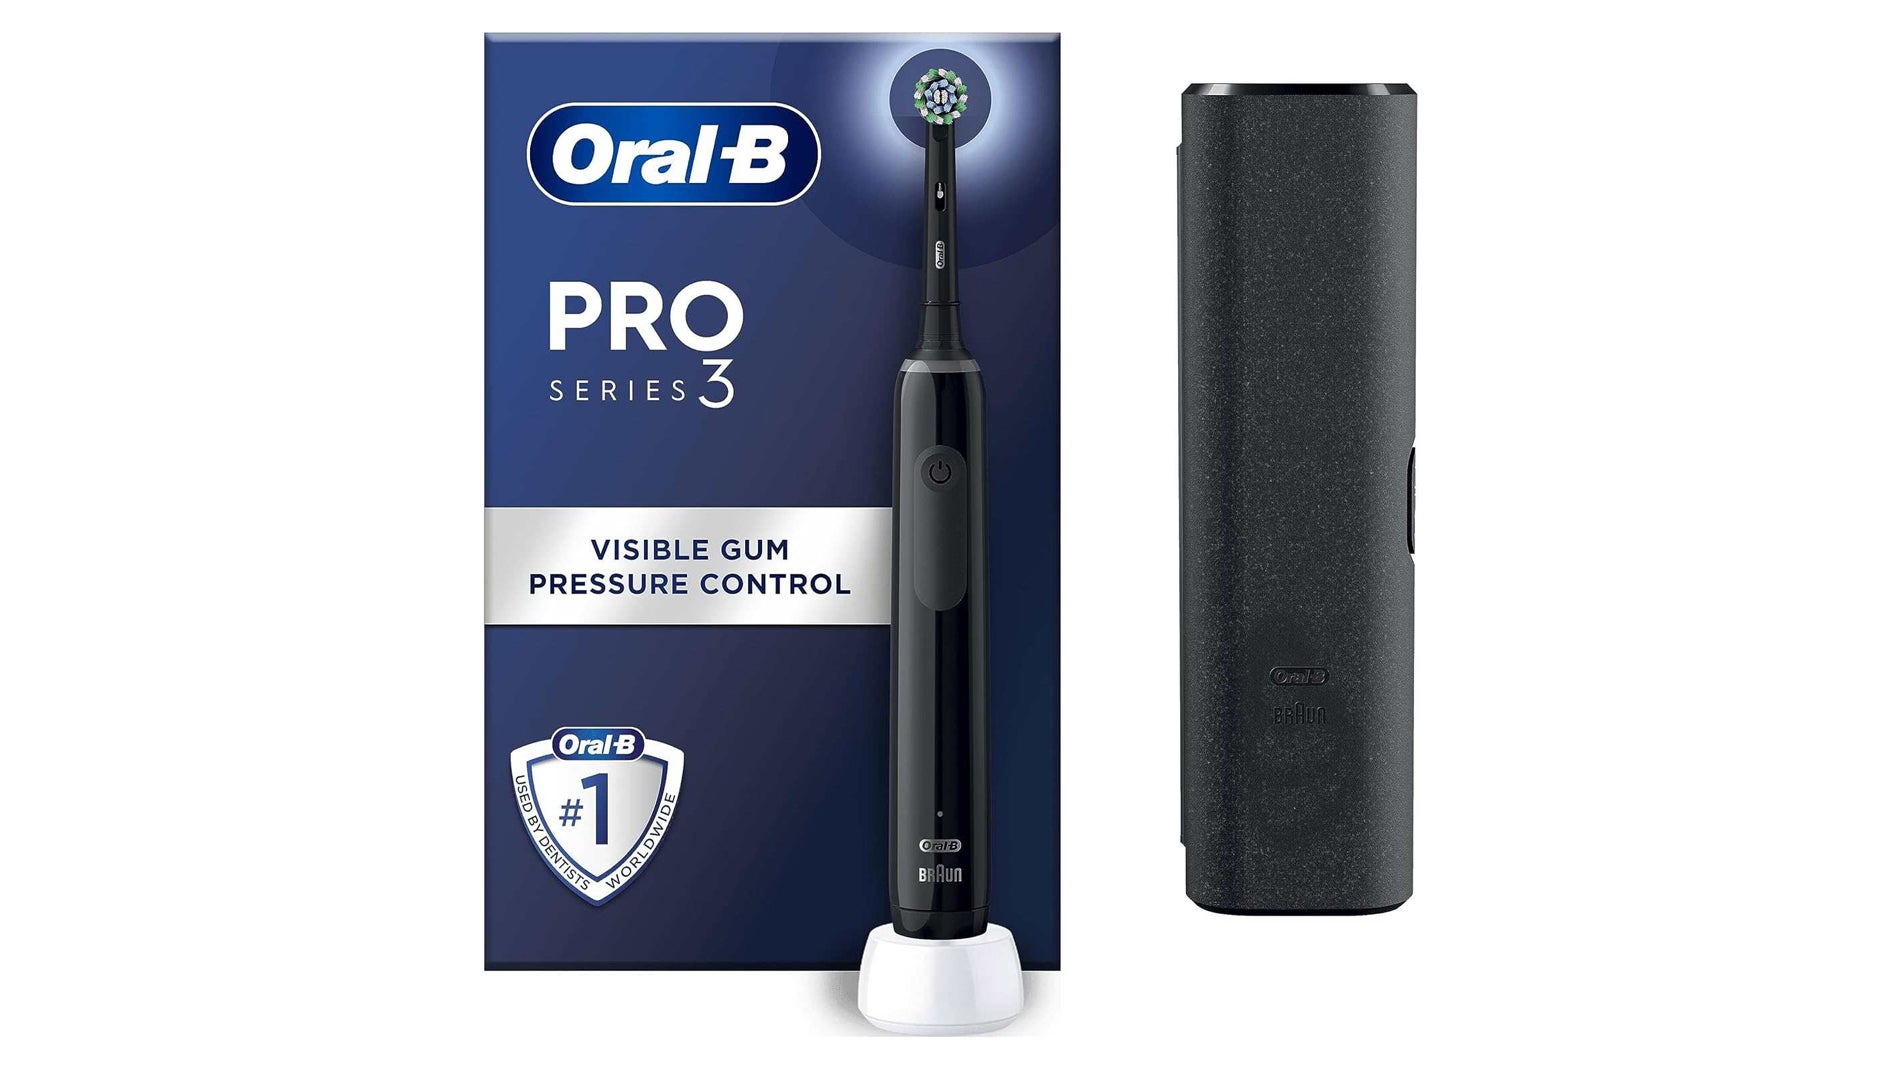 Prime Day live blog - Oral-B Pro 3 electric toothbrush